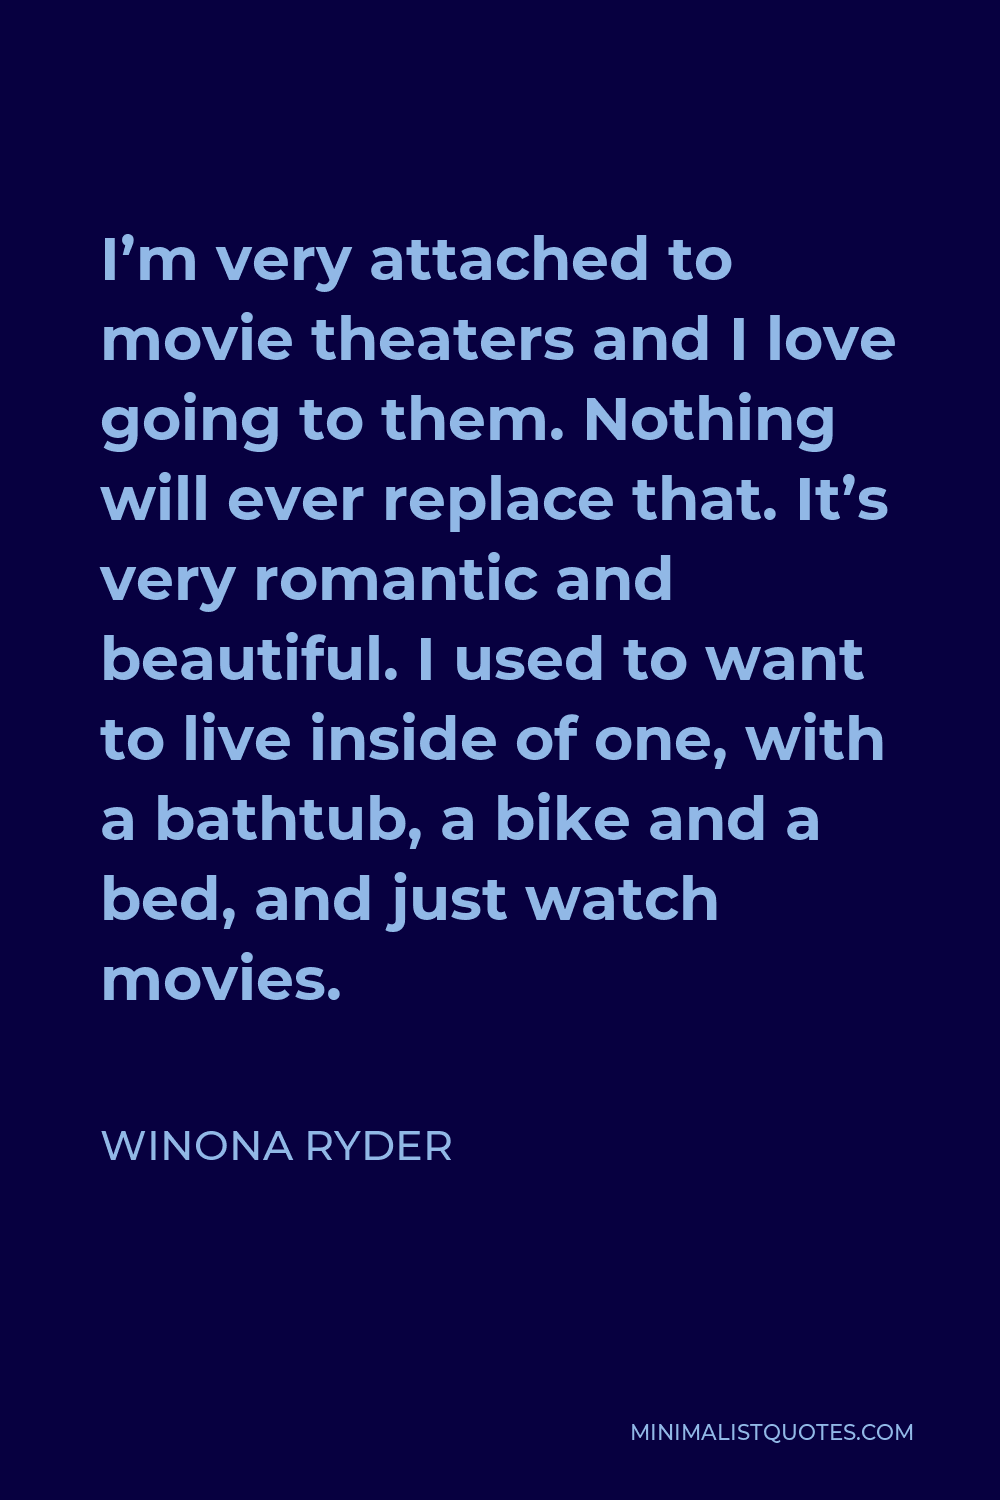 Winona Ryder Quote - I’m very attached to movie theaters and I love going to them. Nothing will ever replace that. It’s very romantic and beautiful. I used to want to live inside of one, with a bathtub, a bike and a bed, and just watch movies.